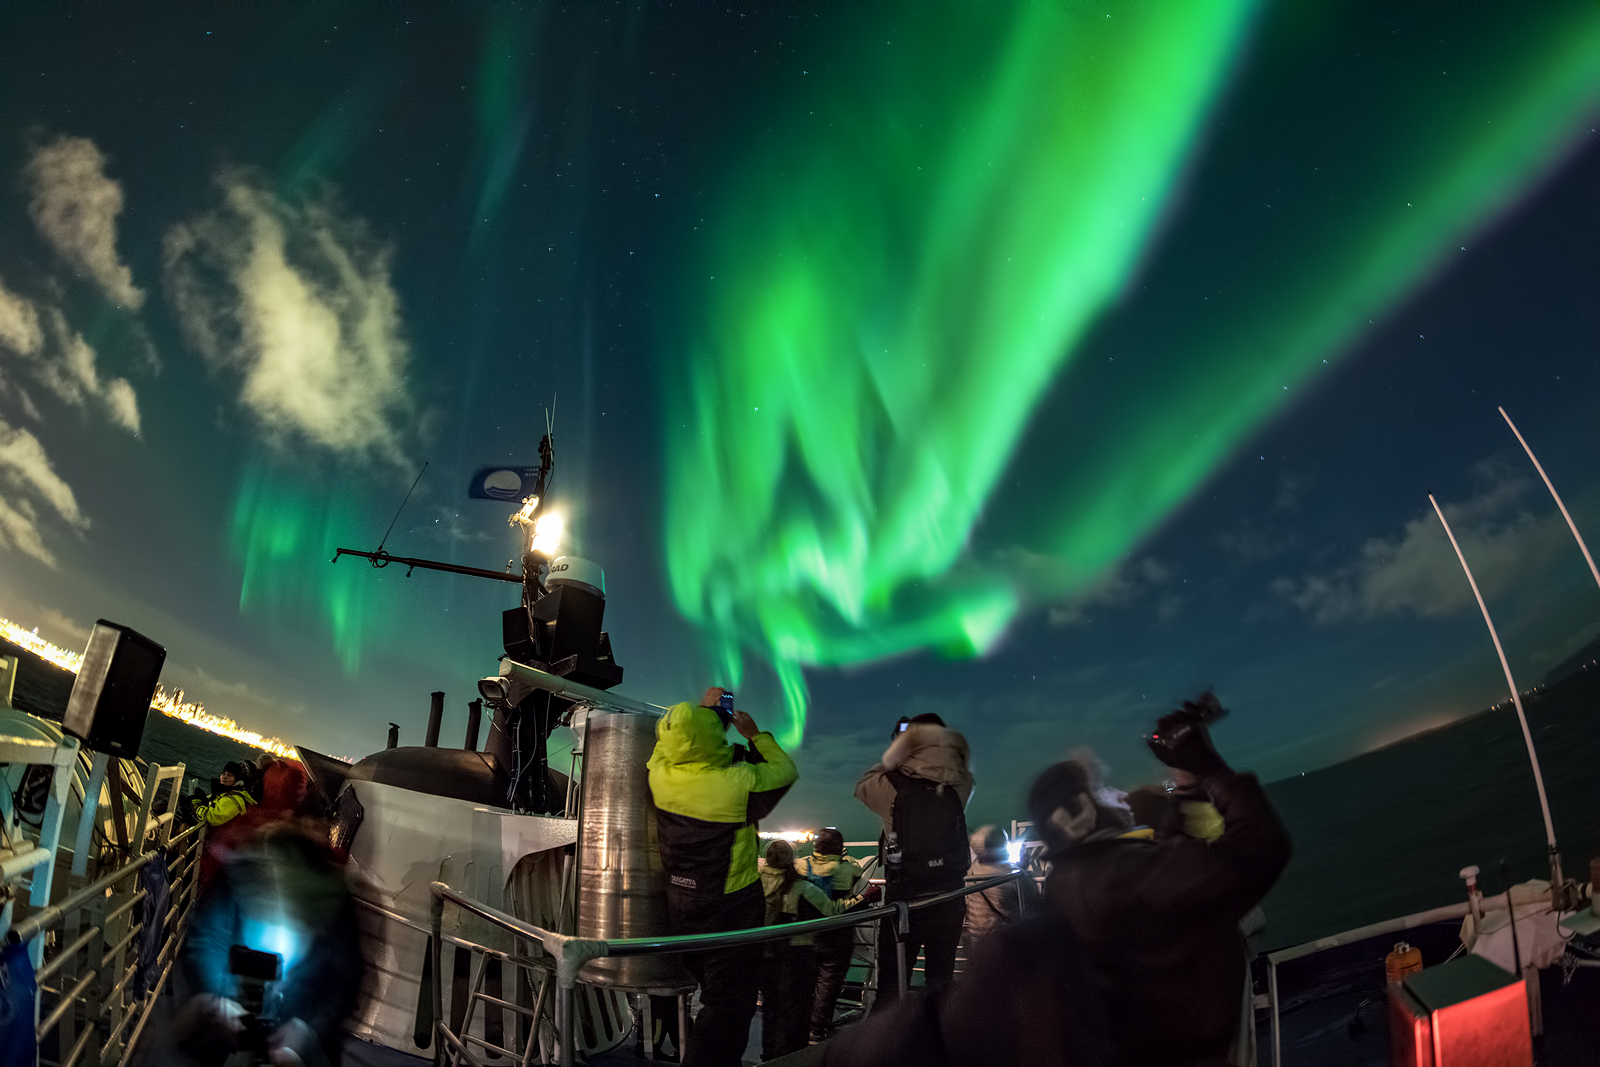 cruises to iceland northern lights